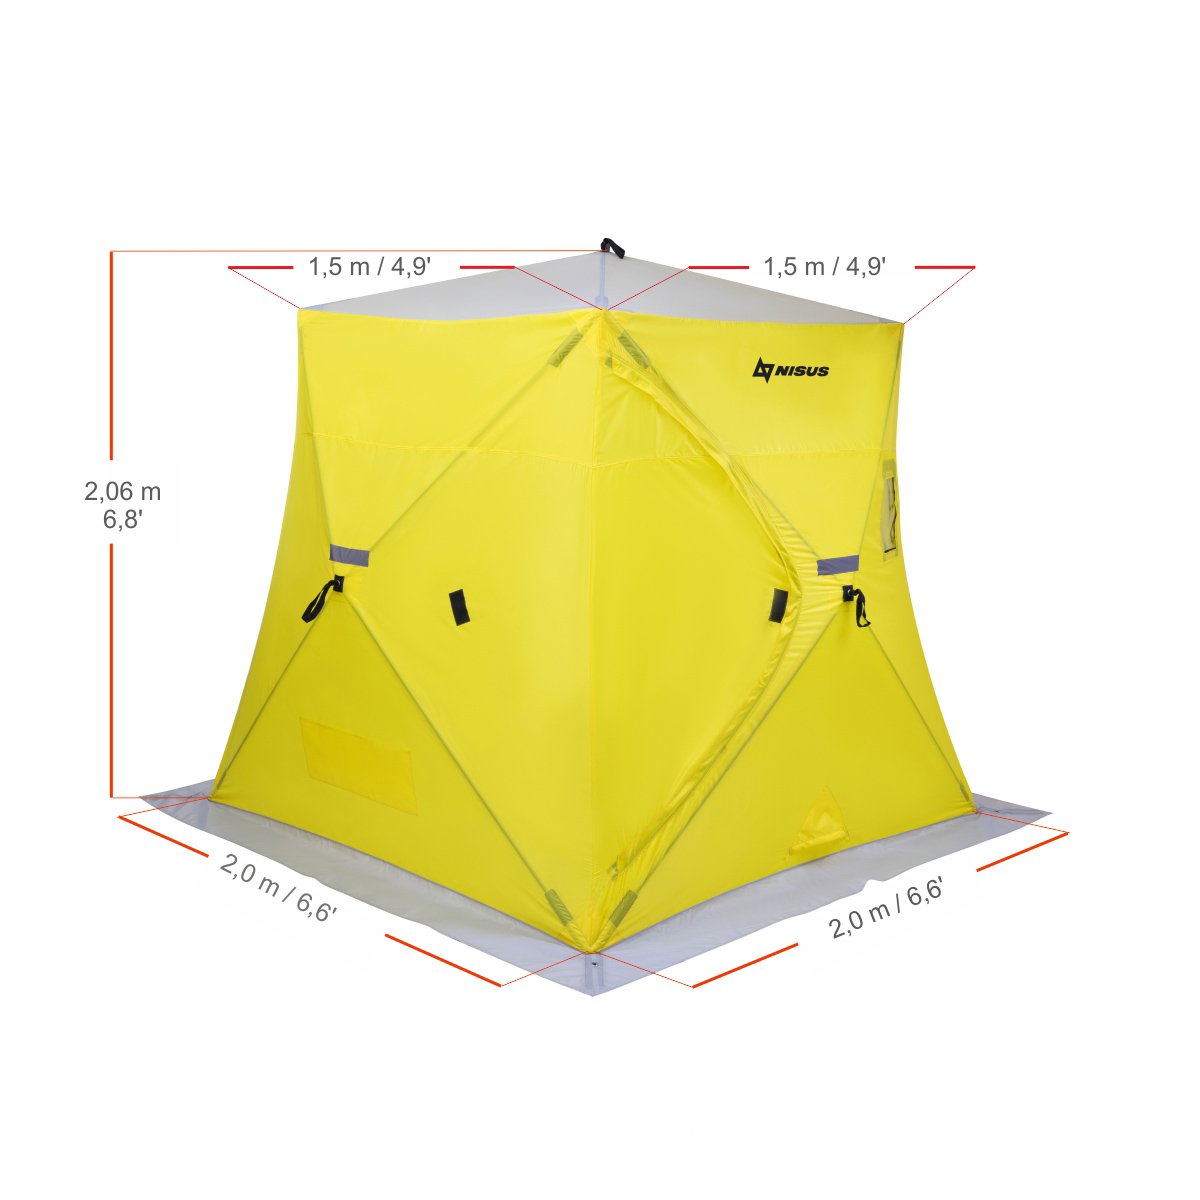 Prism Roomy Pop-Up Ice Fishing Shelter for 3 Persons is 6.8 feet high, 6,6 feet long and 6,6 feet wide